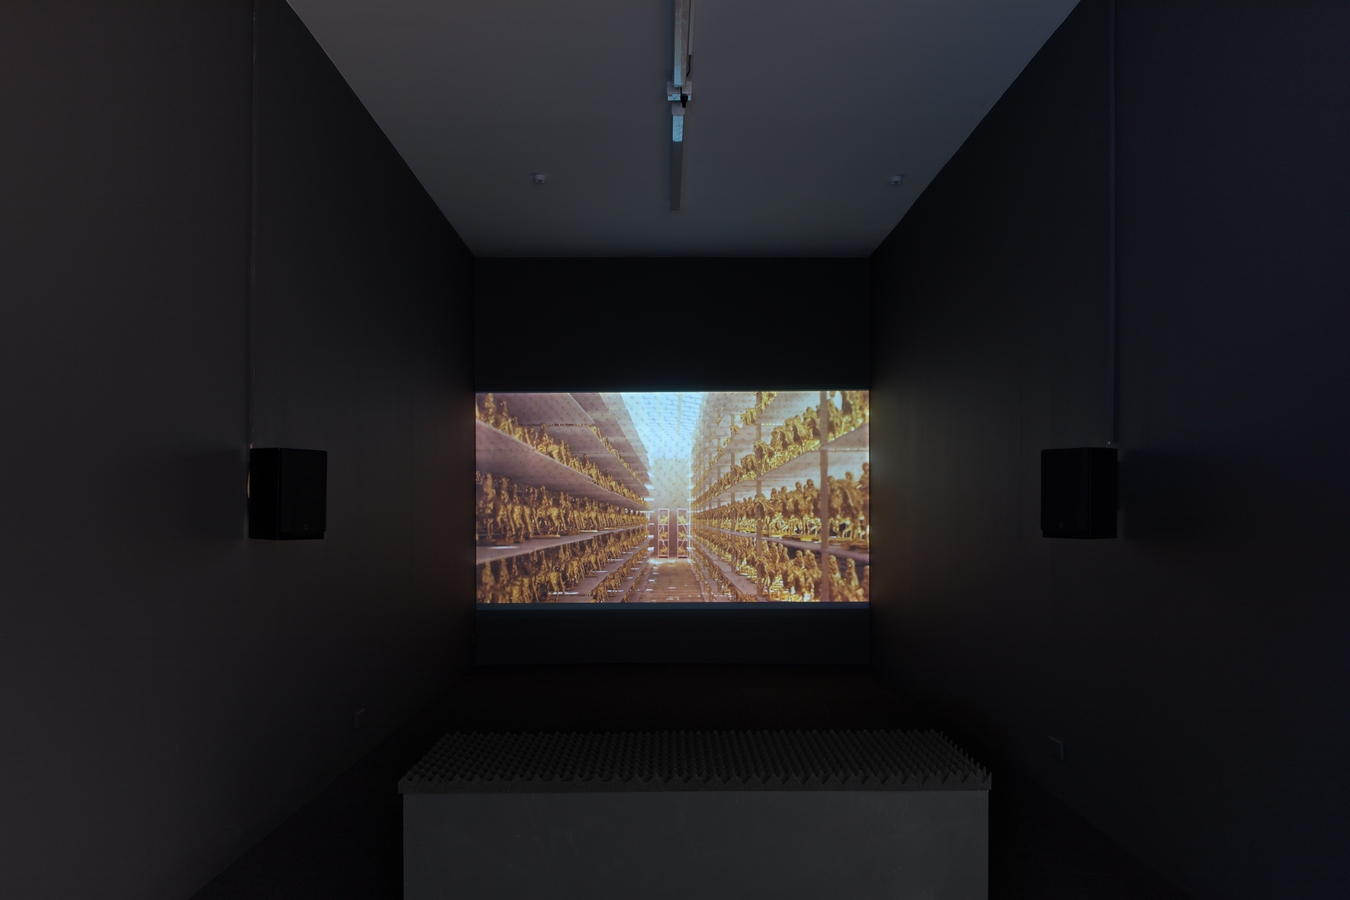 Image: Paul Simon Richards, Quasi-Monte Carlo (installation view), 2020. Part of Programme 2 curated by Michelle Wang. Photo: Janneth Gil.